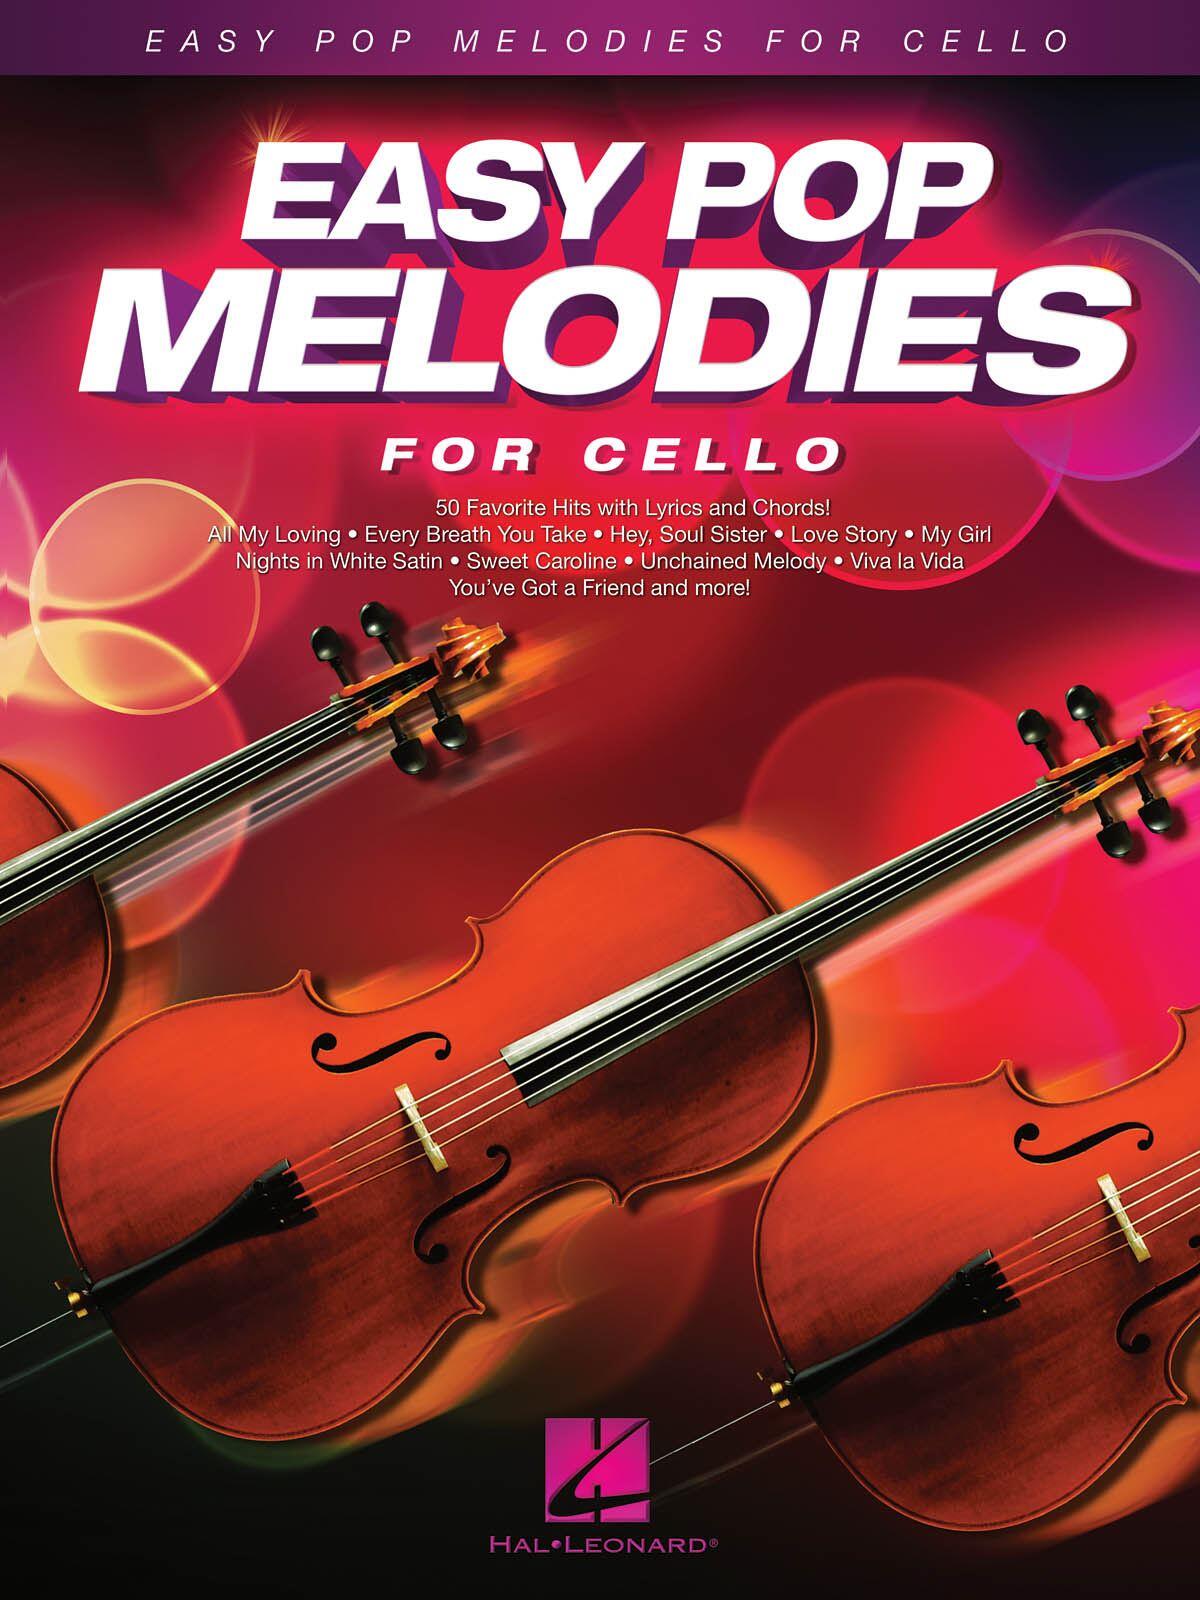 Easy Pop Melodies - for Cello 50 Favorite Hits with Lyrics and Chords : photo 1